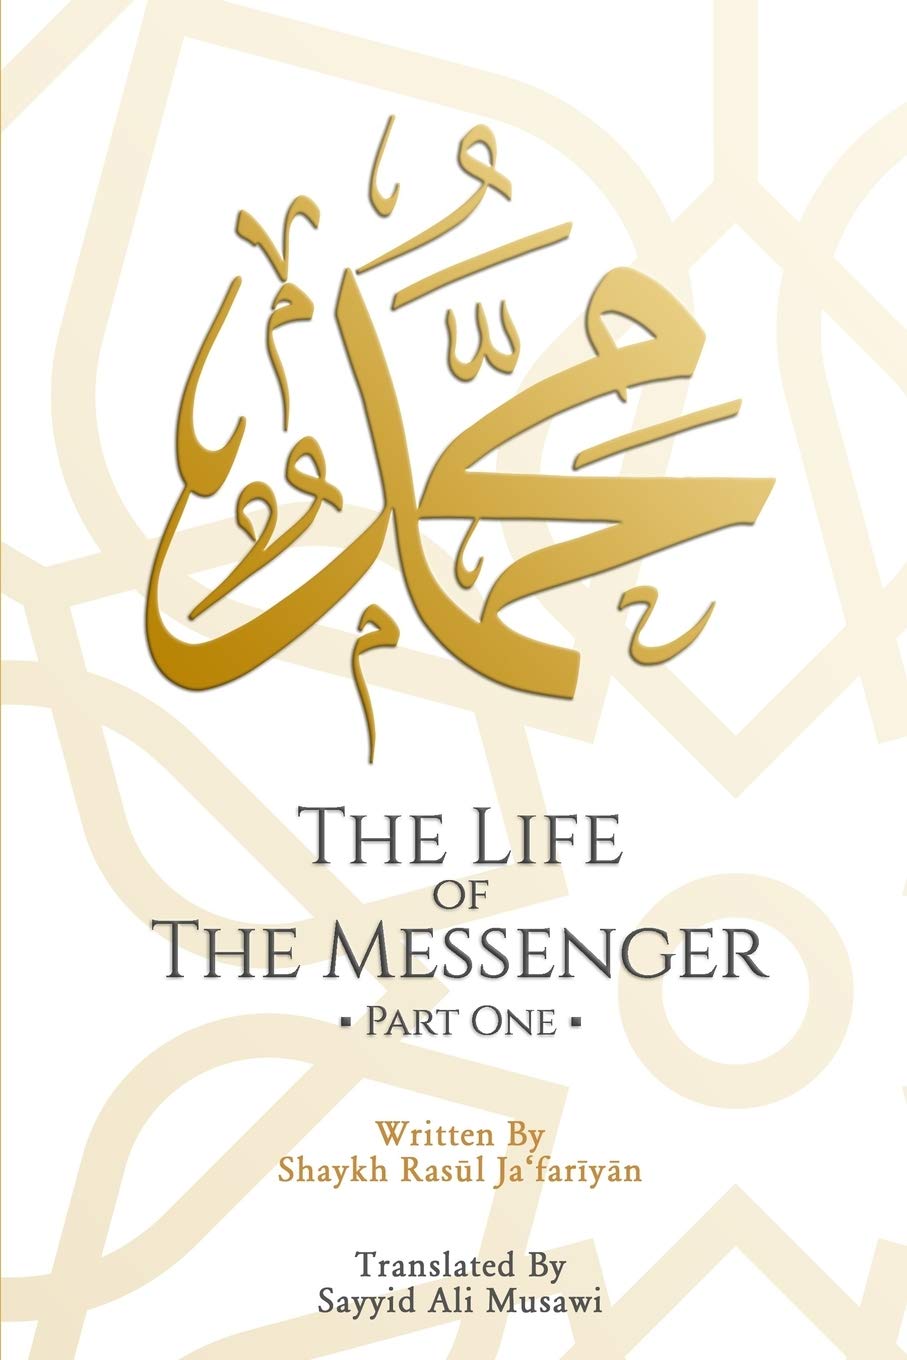 The Life of the Messenger - Part One